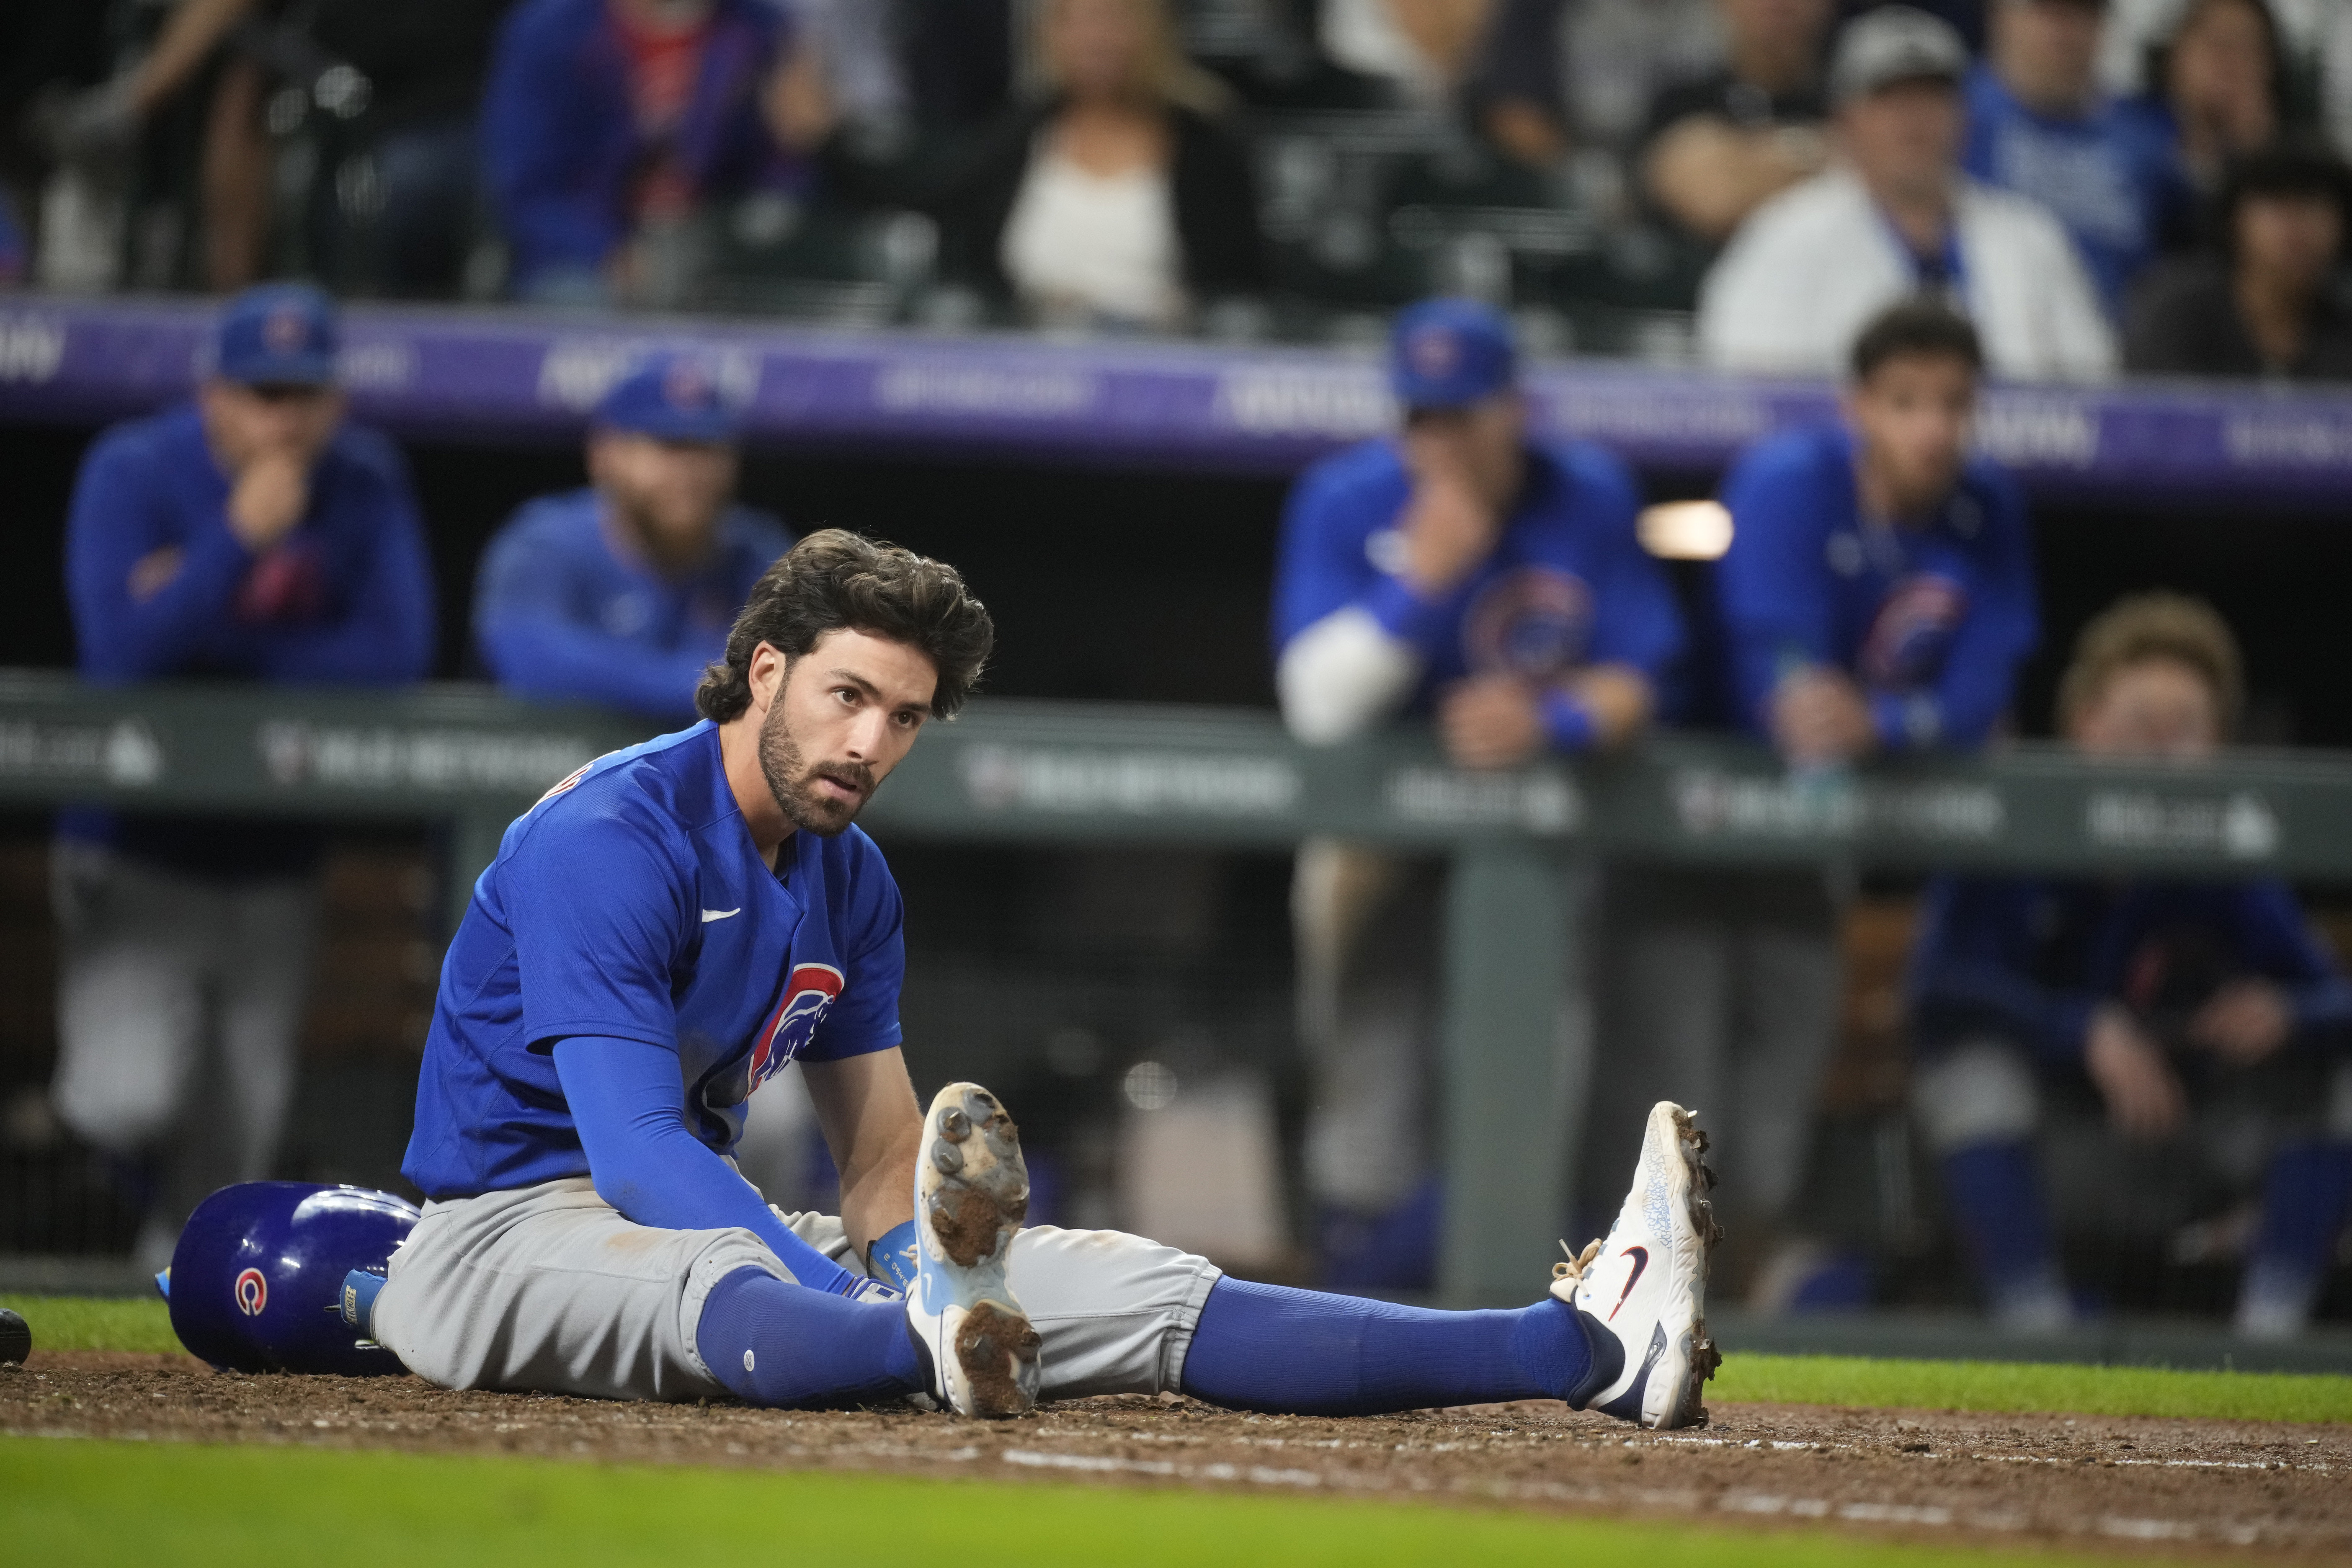 Chicago Cubs vs. Pittsburgh Pirates preview, Friday 6/16, 6:05 CT